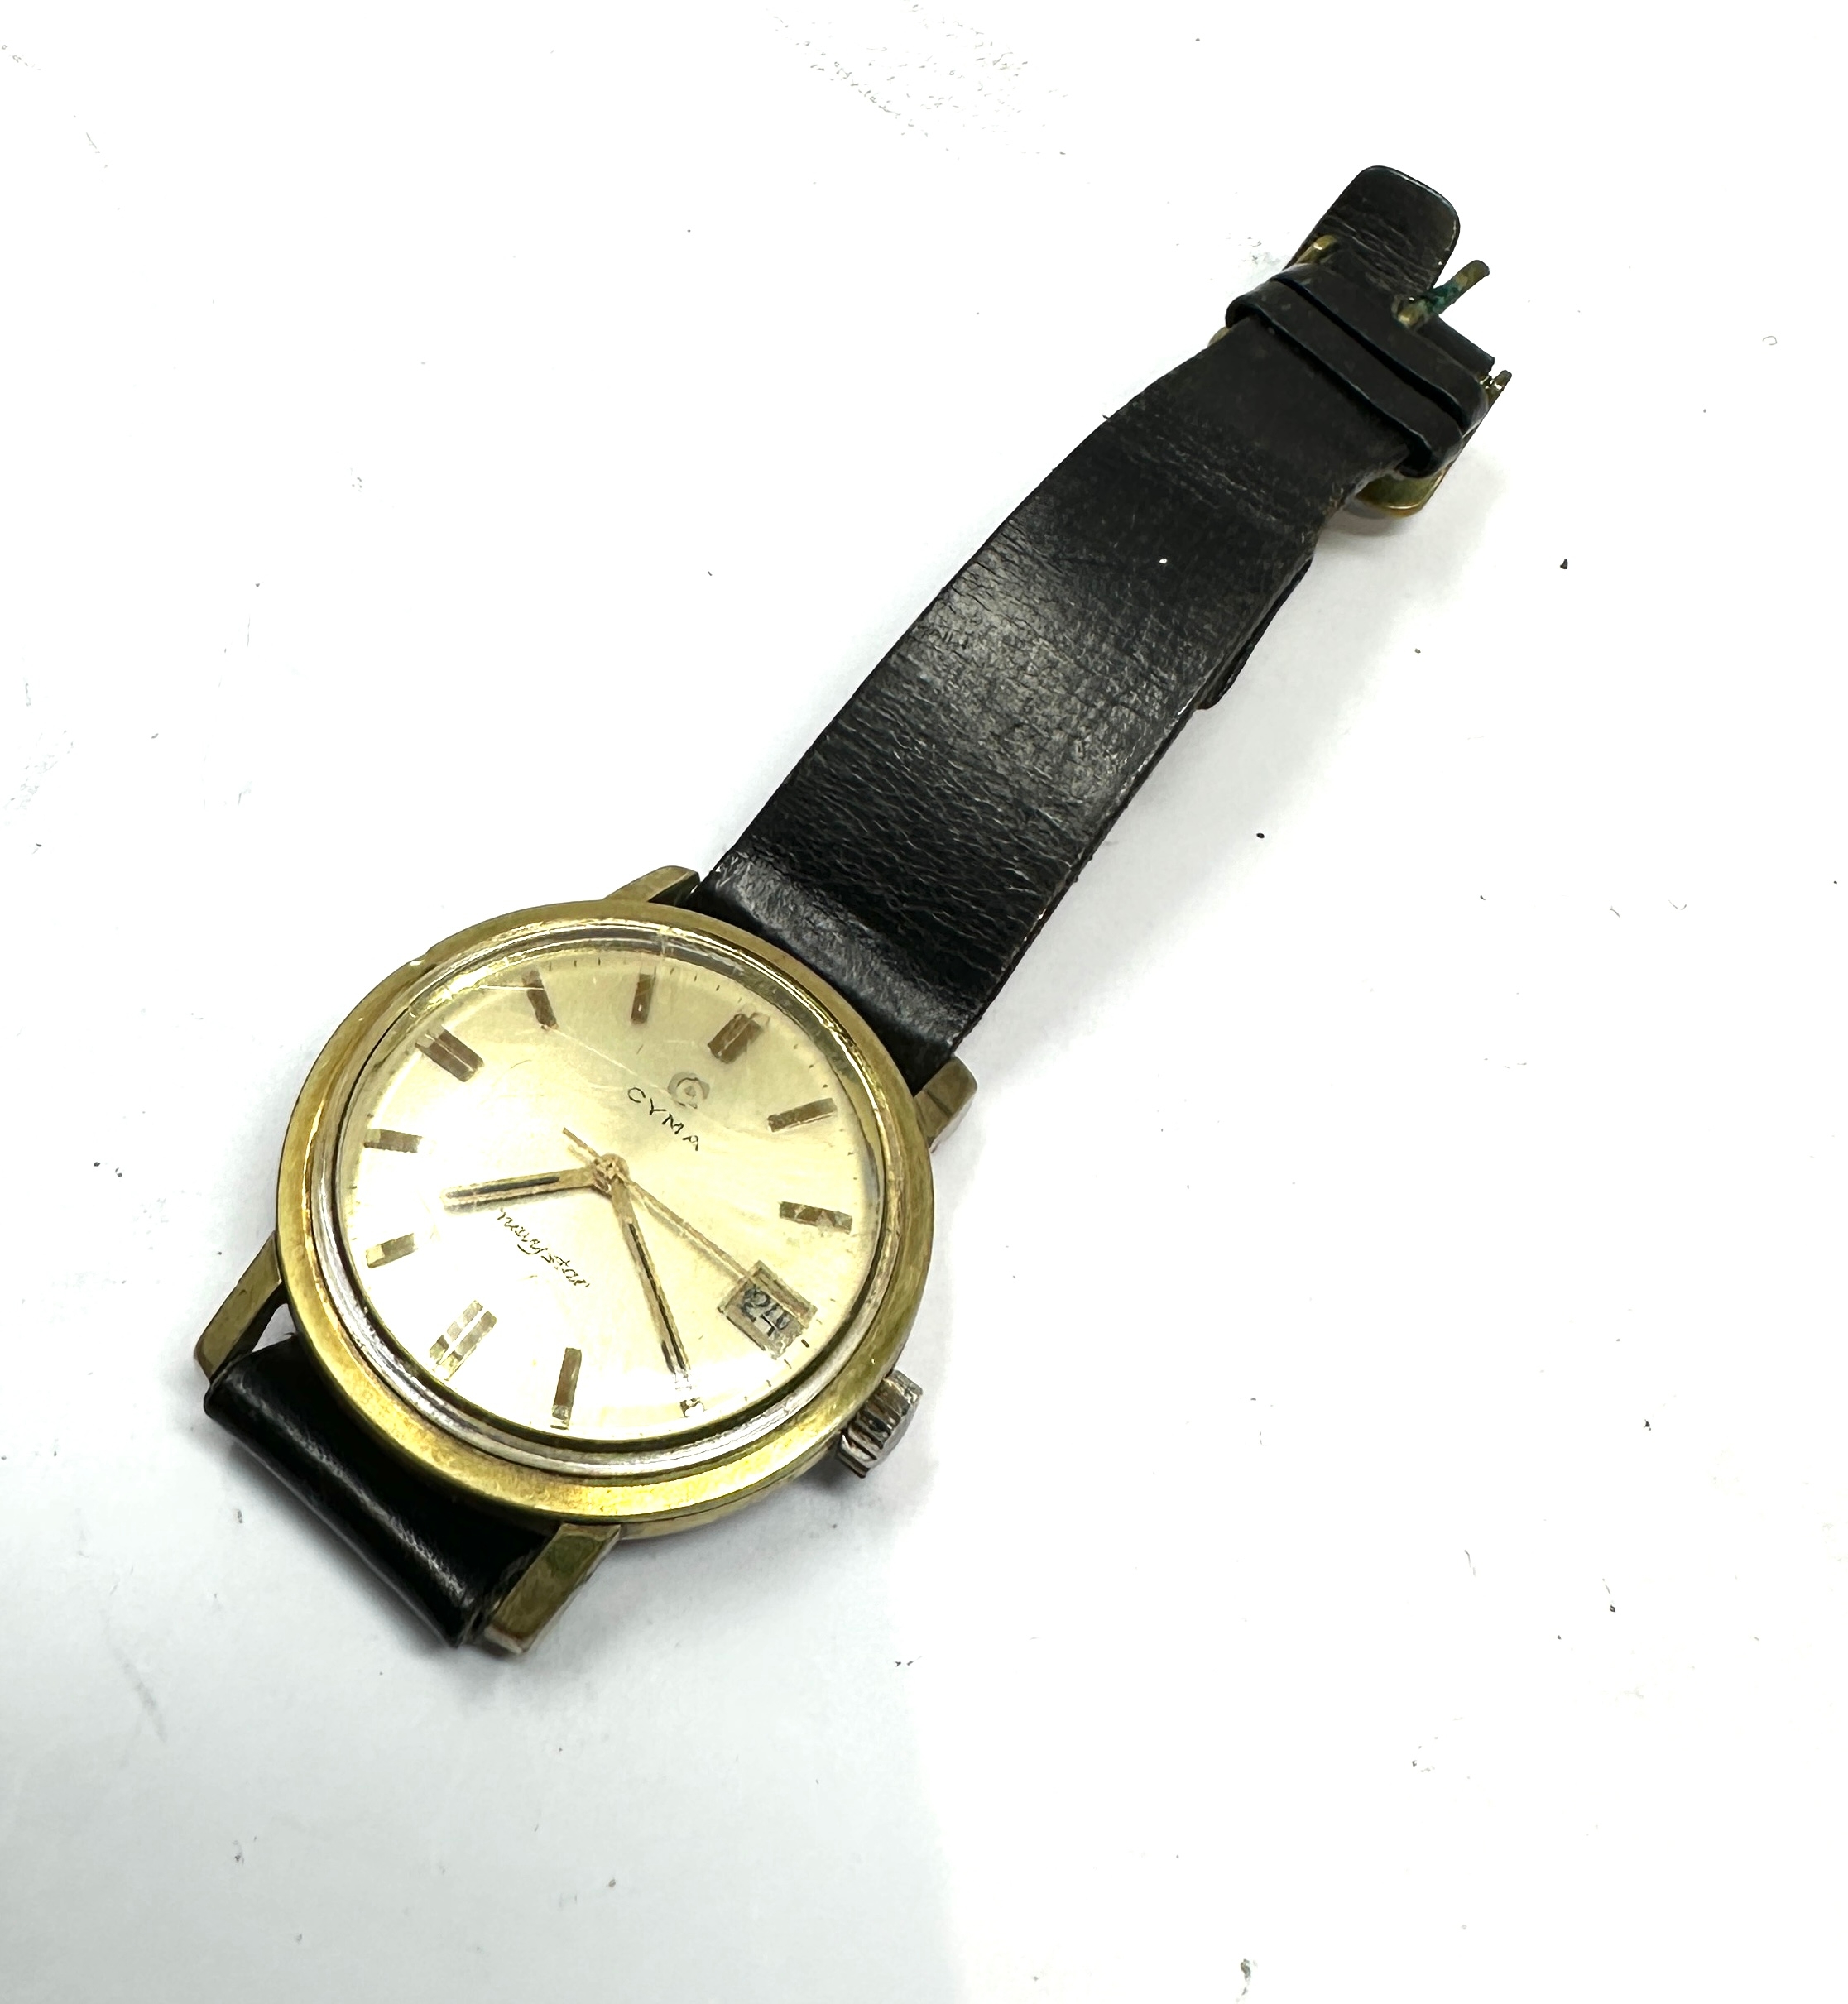 Vintage Cyma navystar gents wristwatch the watch is ticking - Image 4 of 4